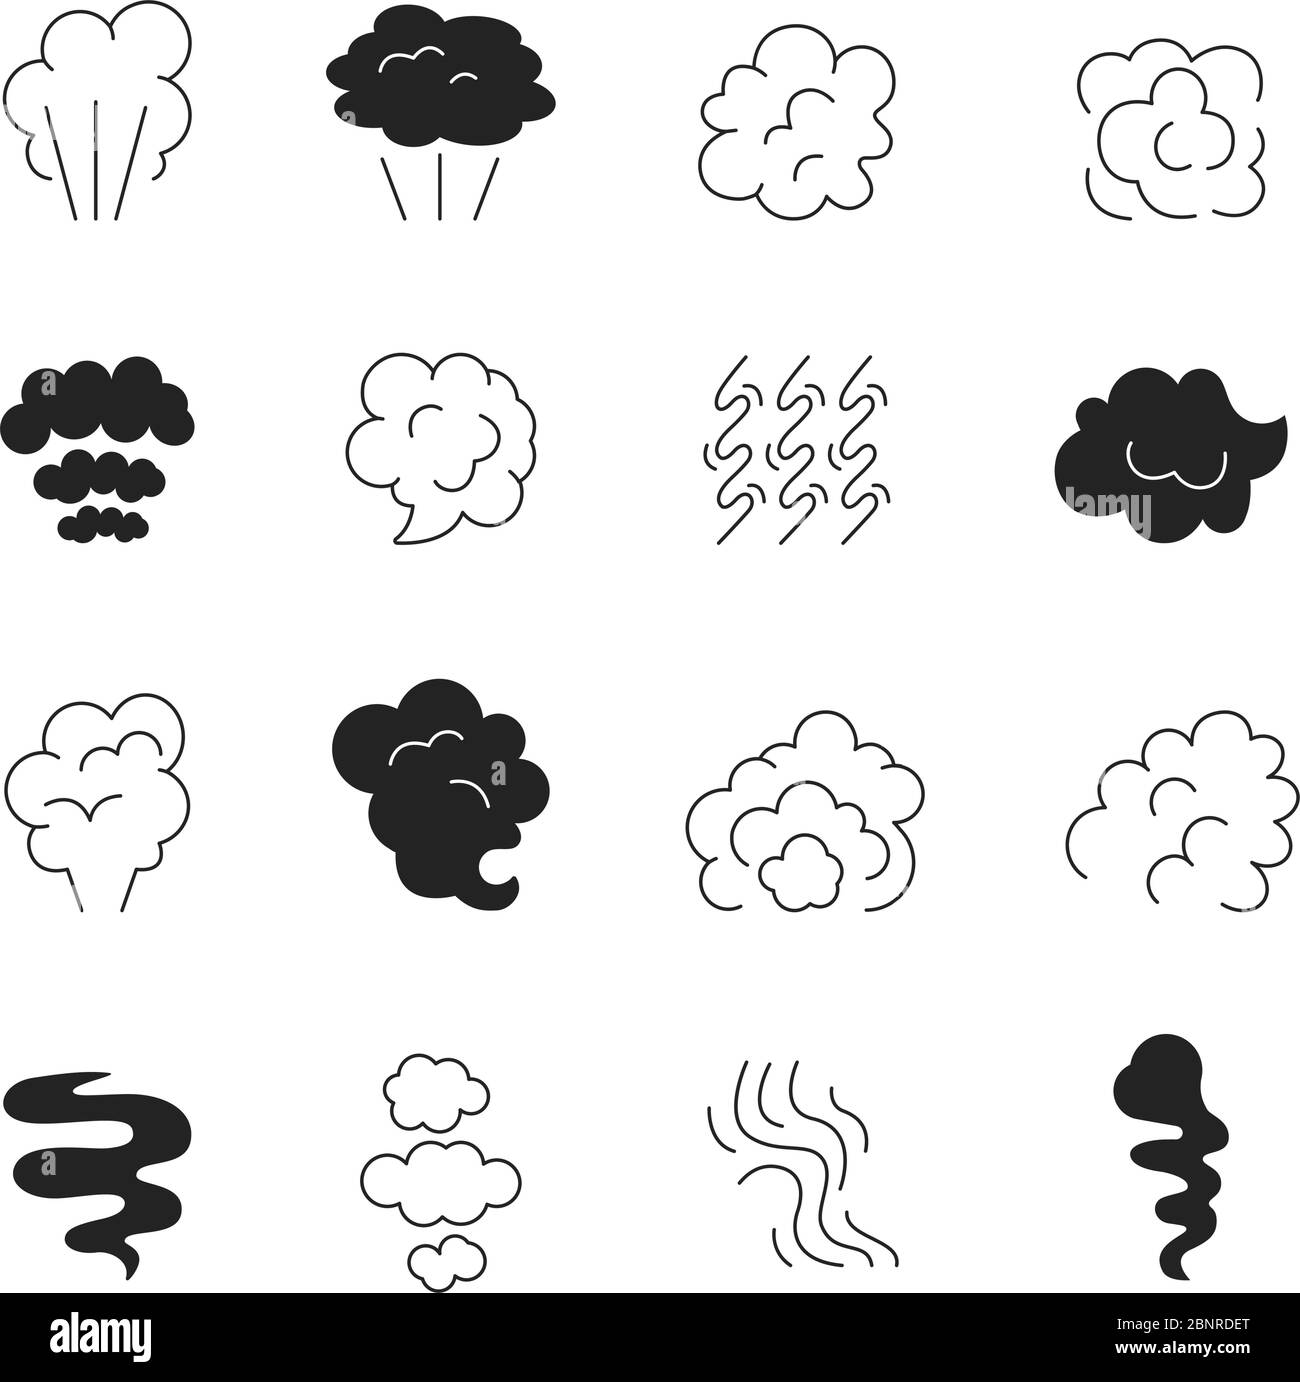 Smoke line icon. Steam smell and smoking clouds stylized symbols silhouette vector pictures isolated Stock Vector